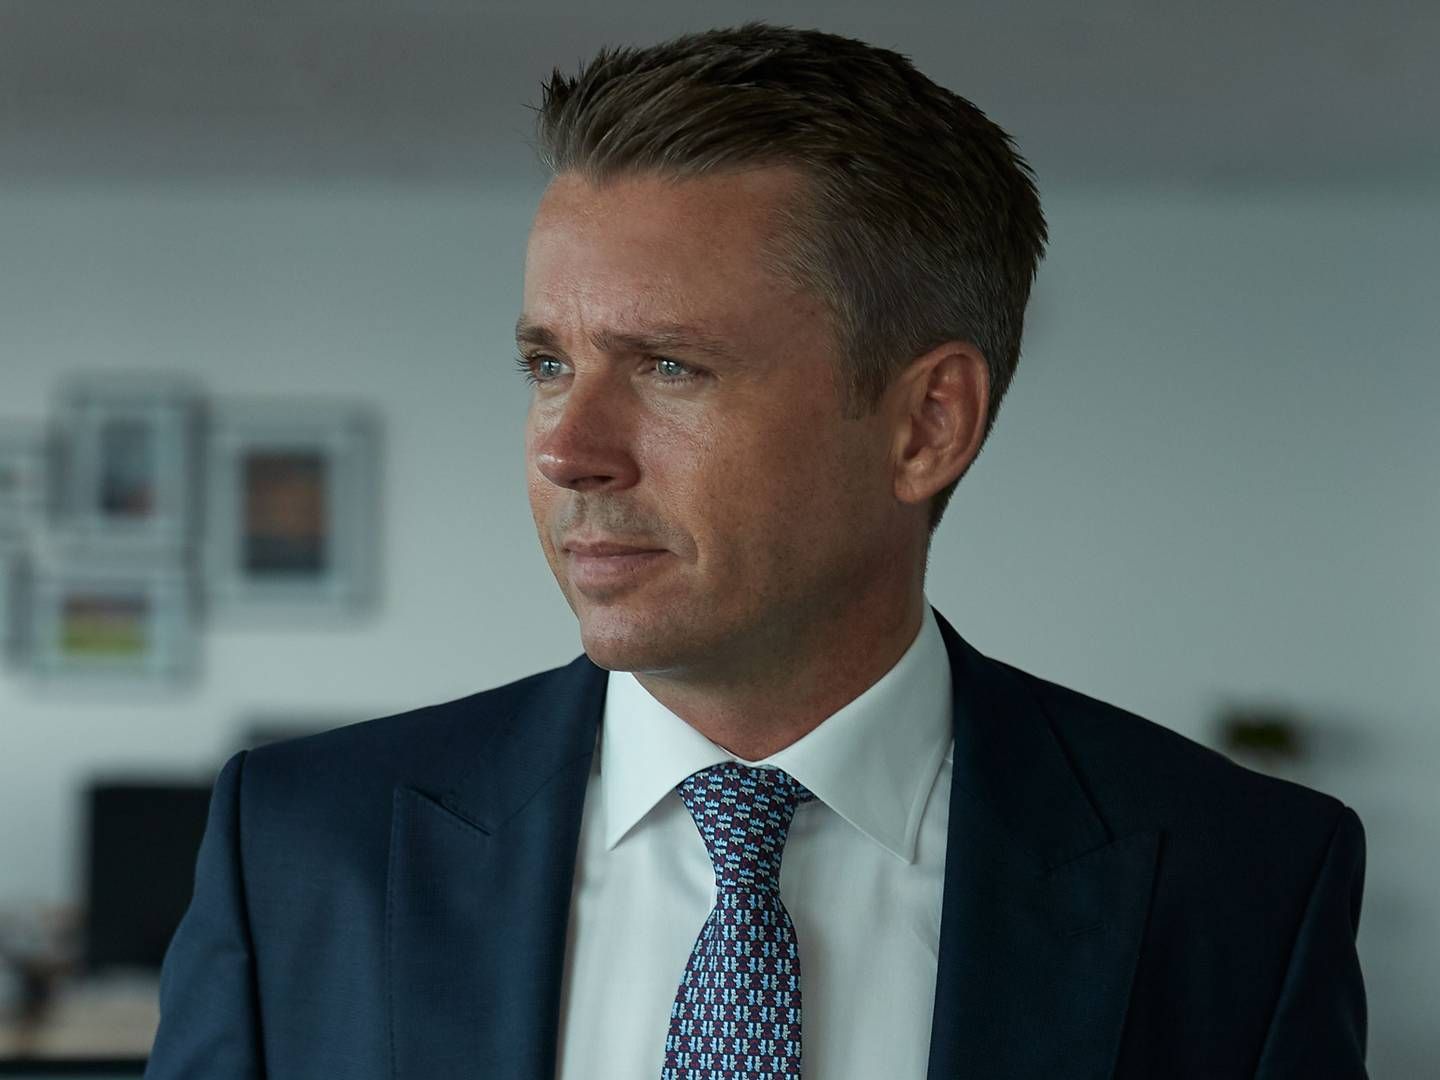 Anders Østergaard acquires 51% of the shares in the company and becomes chairman of the board. | Photo: Monjasa